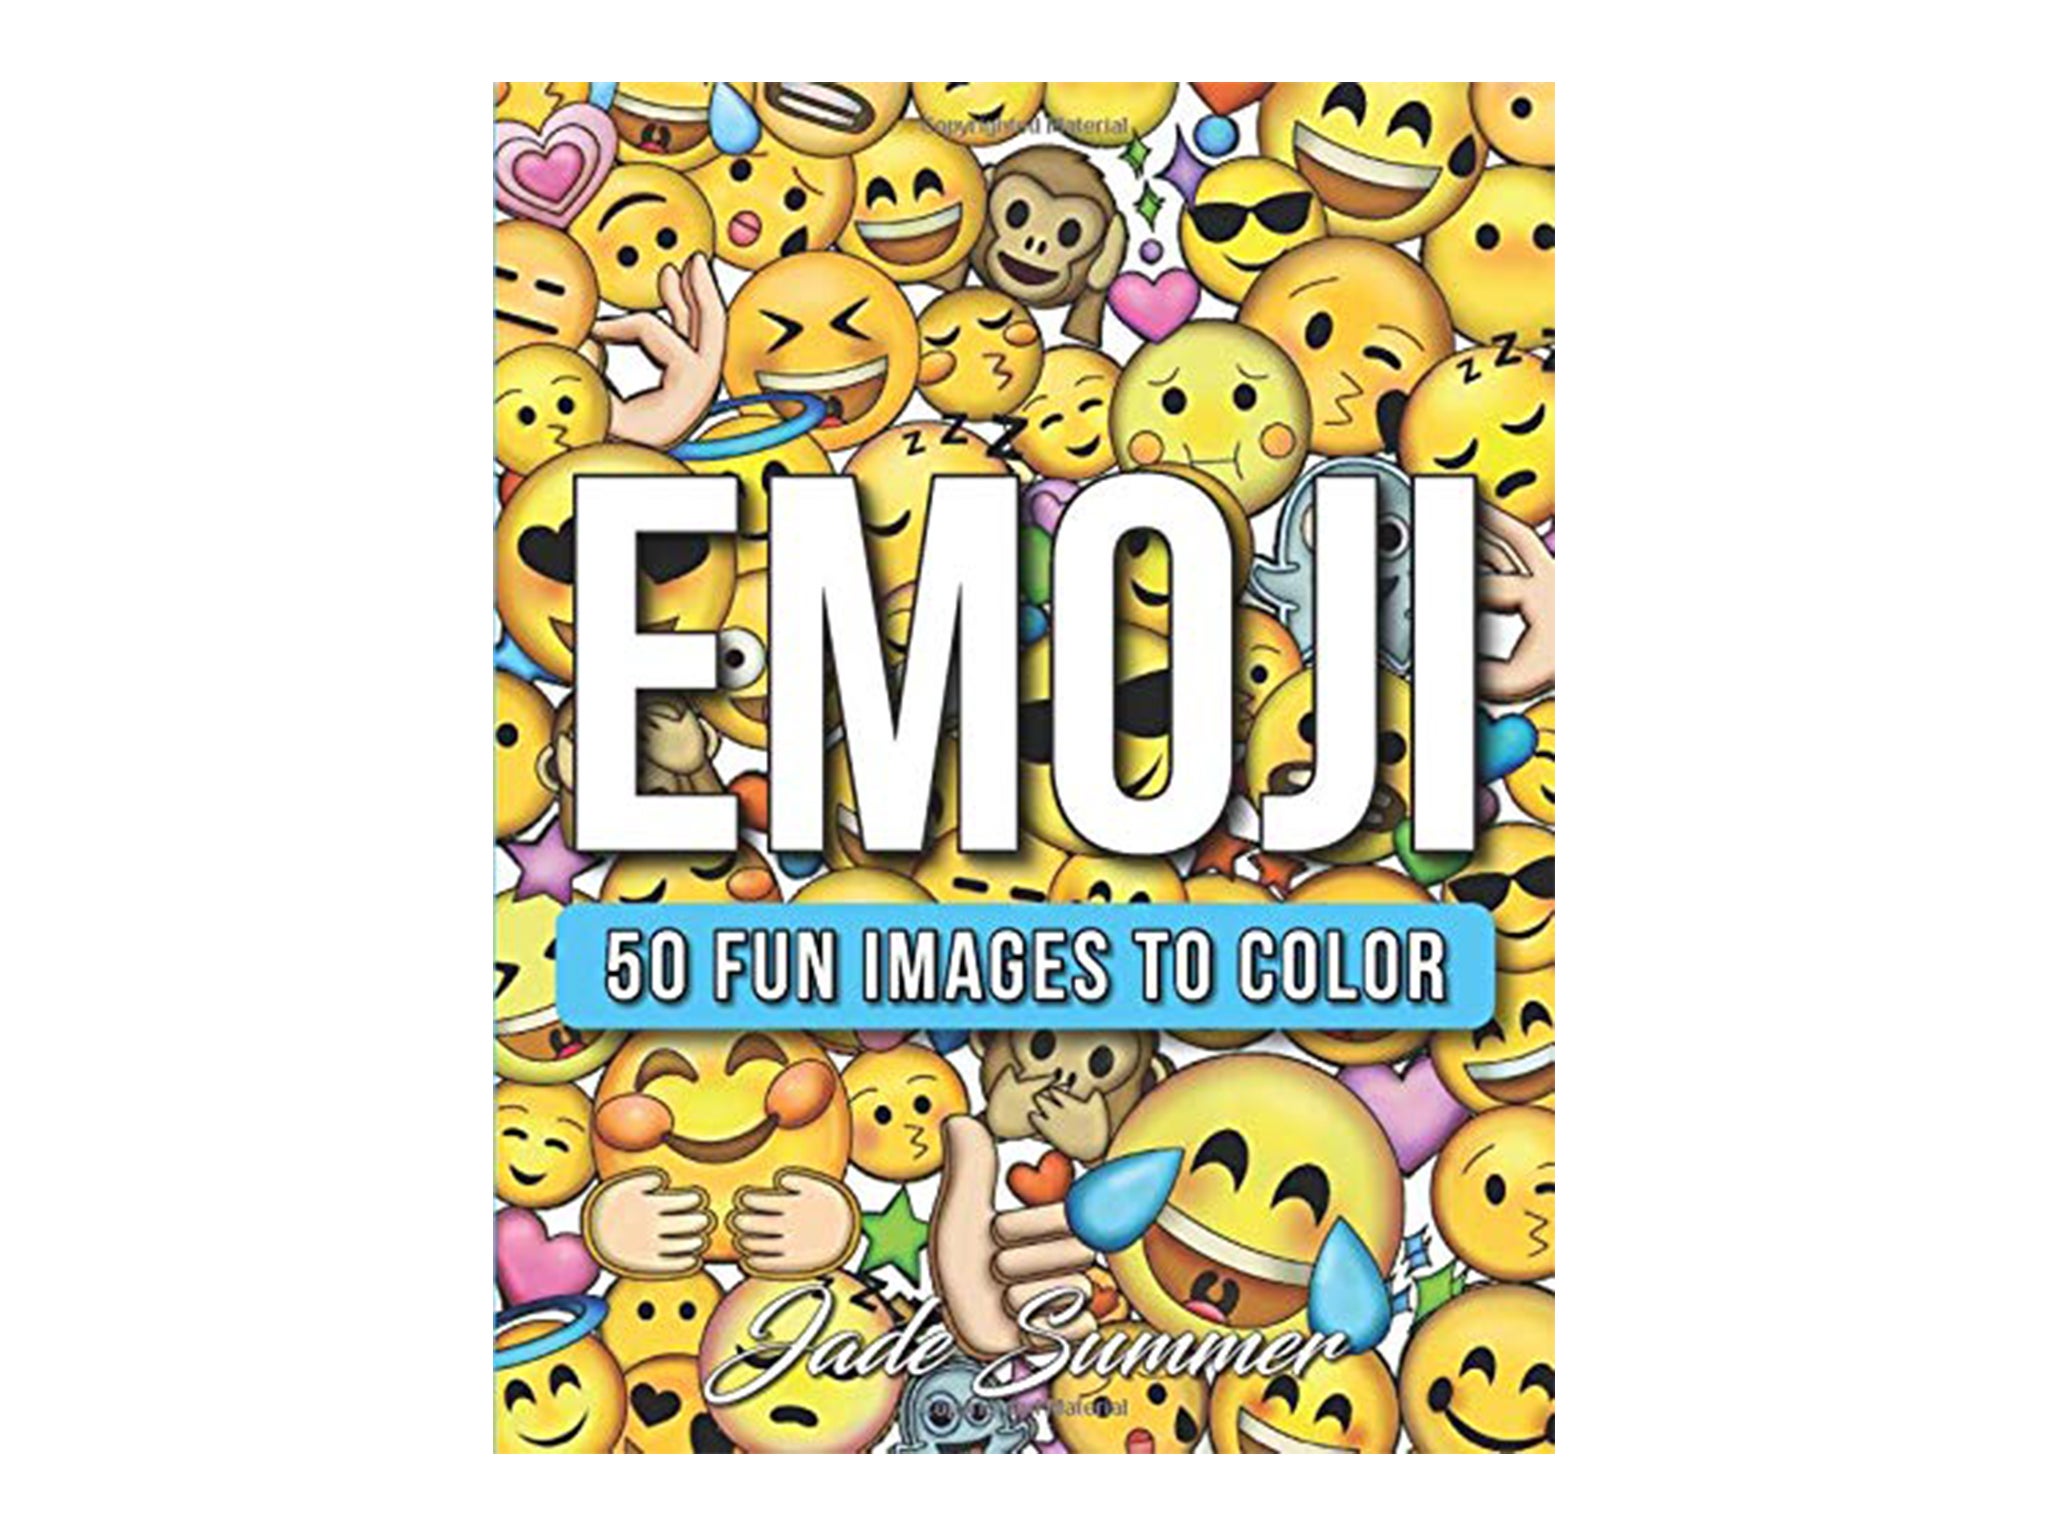 Colour in emoji scenes to pass the time on a rainy day